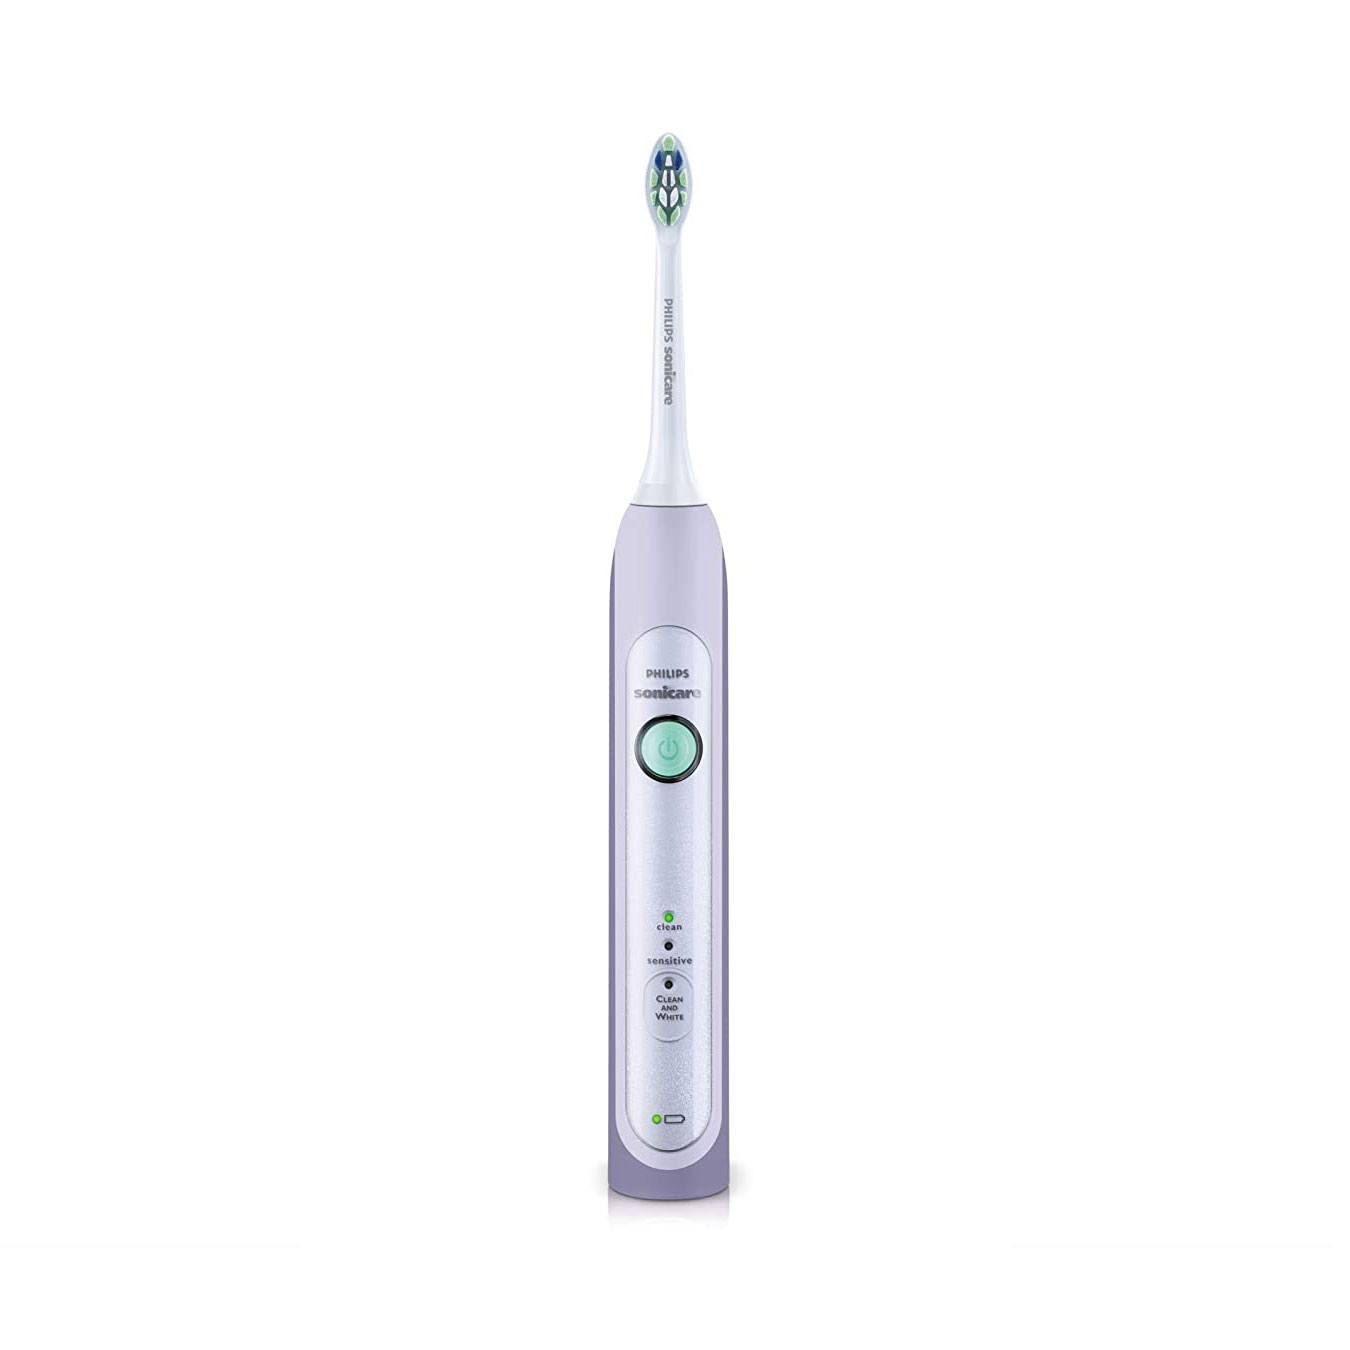 Philips Sonicare HealthyWhite Sonic Electric Rechargeable Toothbrush, Lavender - image 2 of 4